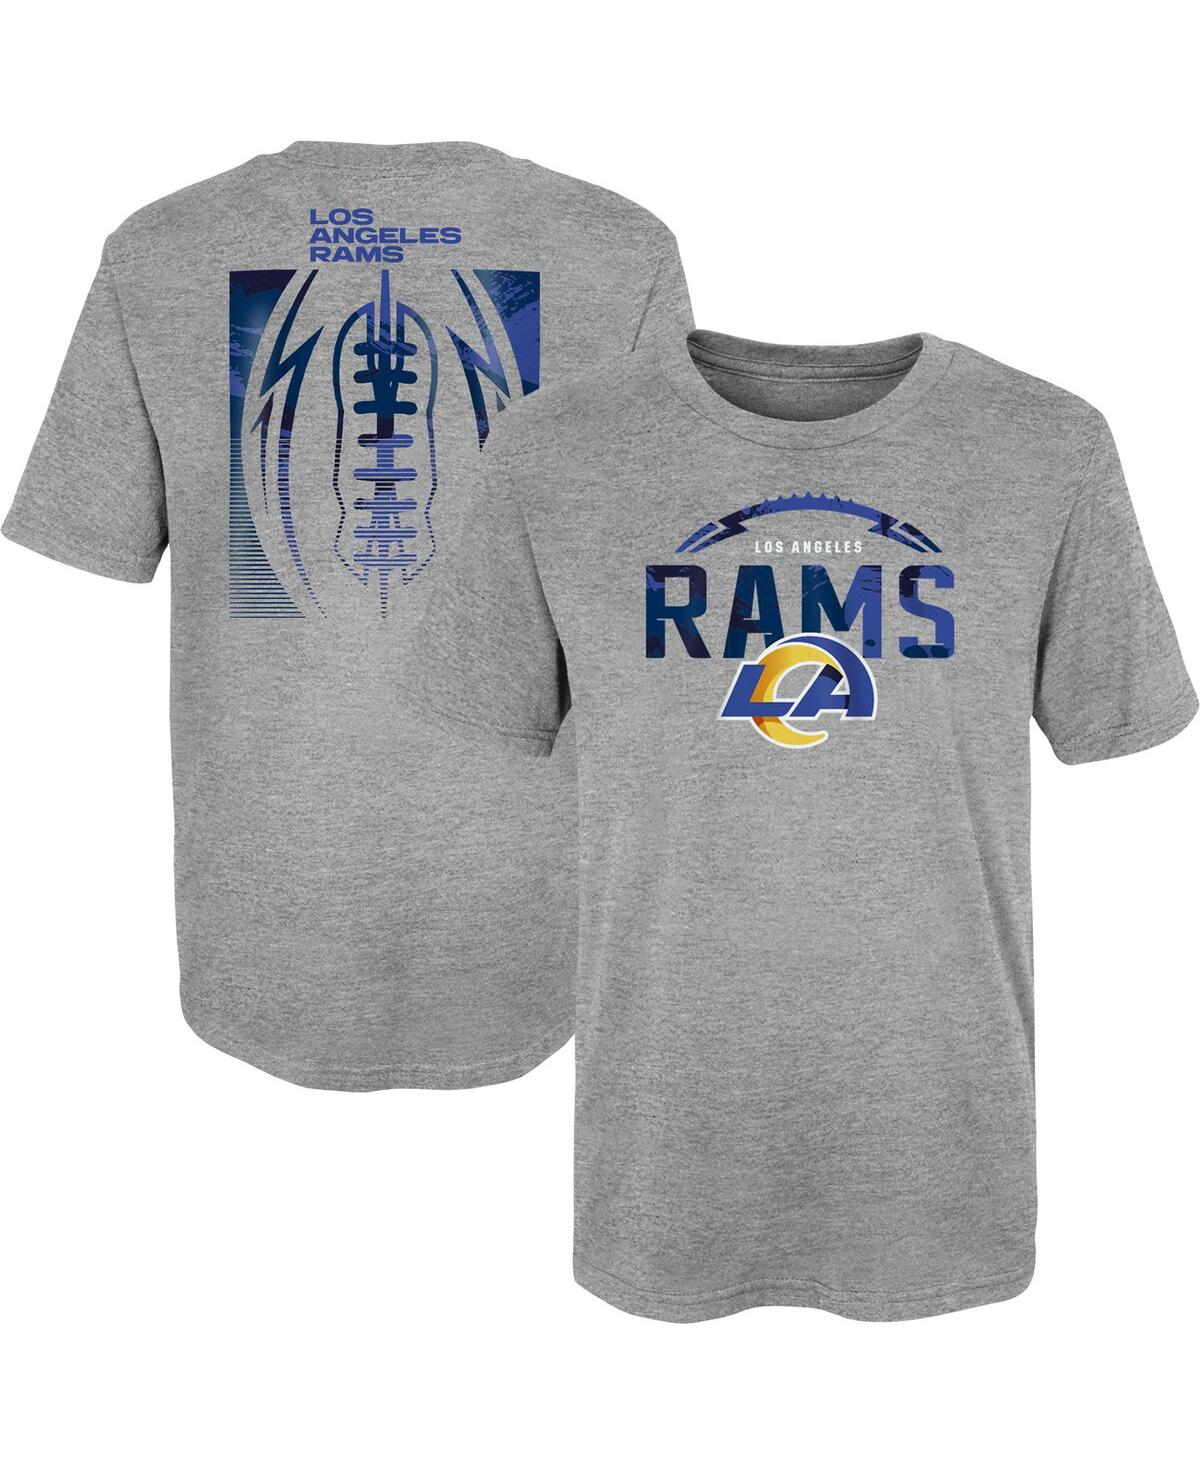 Outerstuff Babies' Preschool Boys And Girls Heathered Gray Los Angeles Rams Blitz Ball T-shirt In Heather Gray